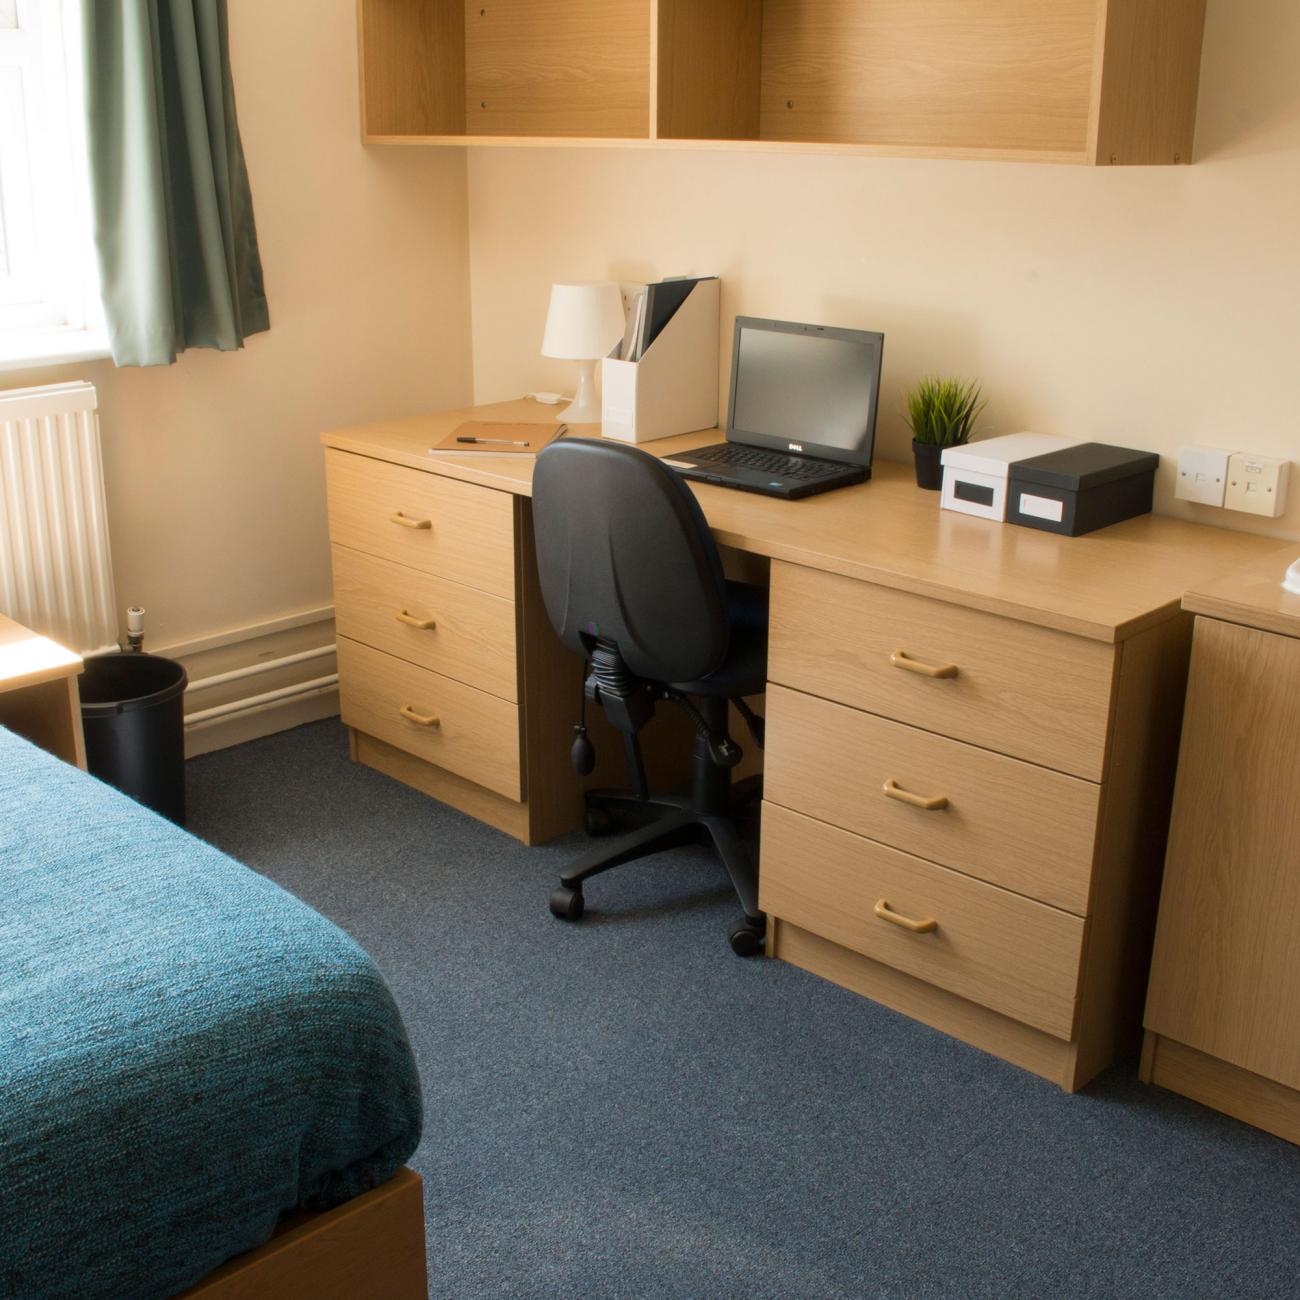 Student bedroom showing a desk and a neatly made bed with dark blue sheets. A large window lets light into the room.